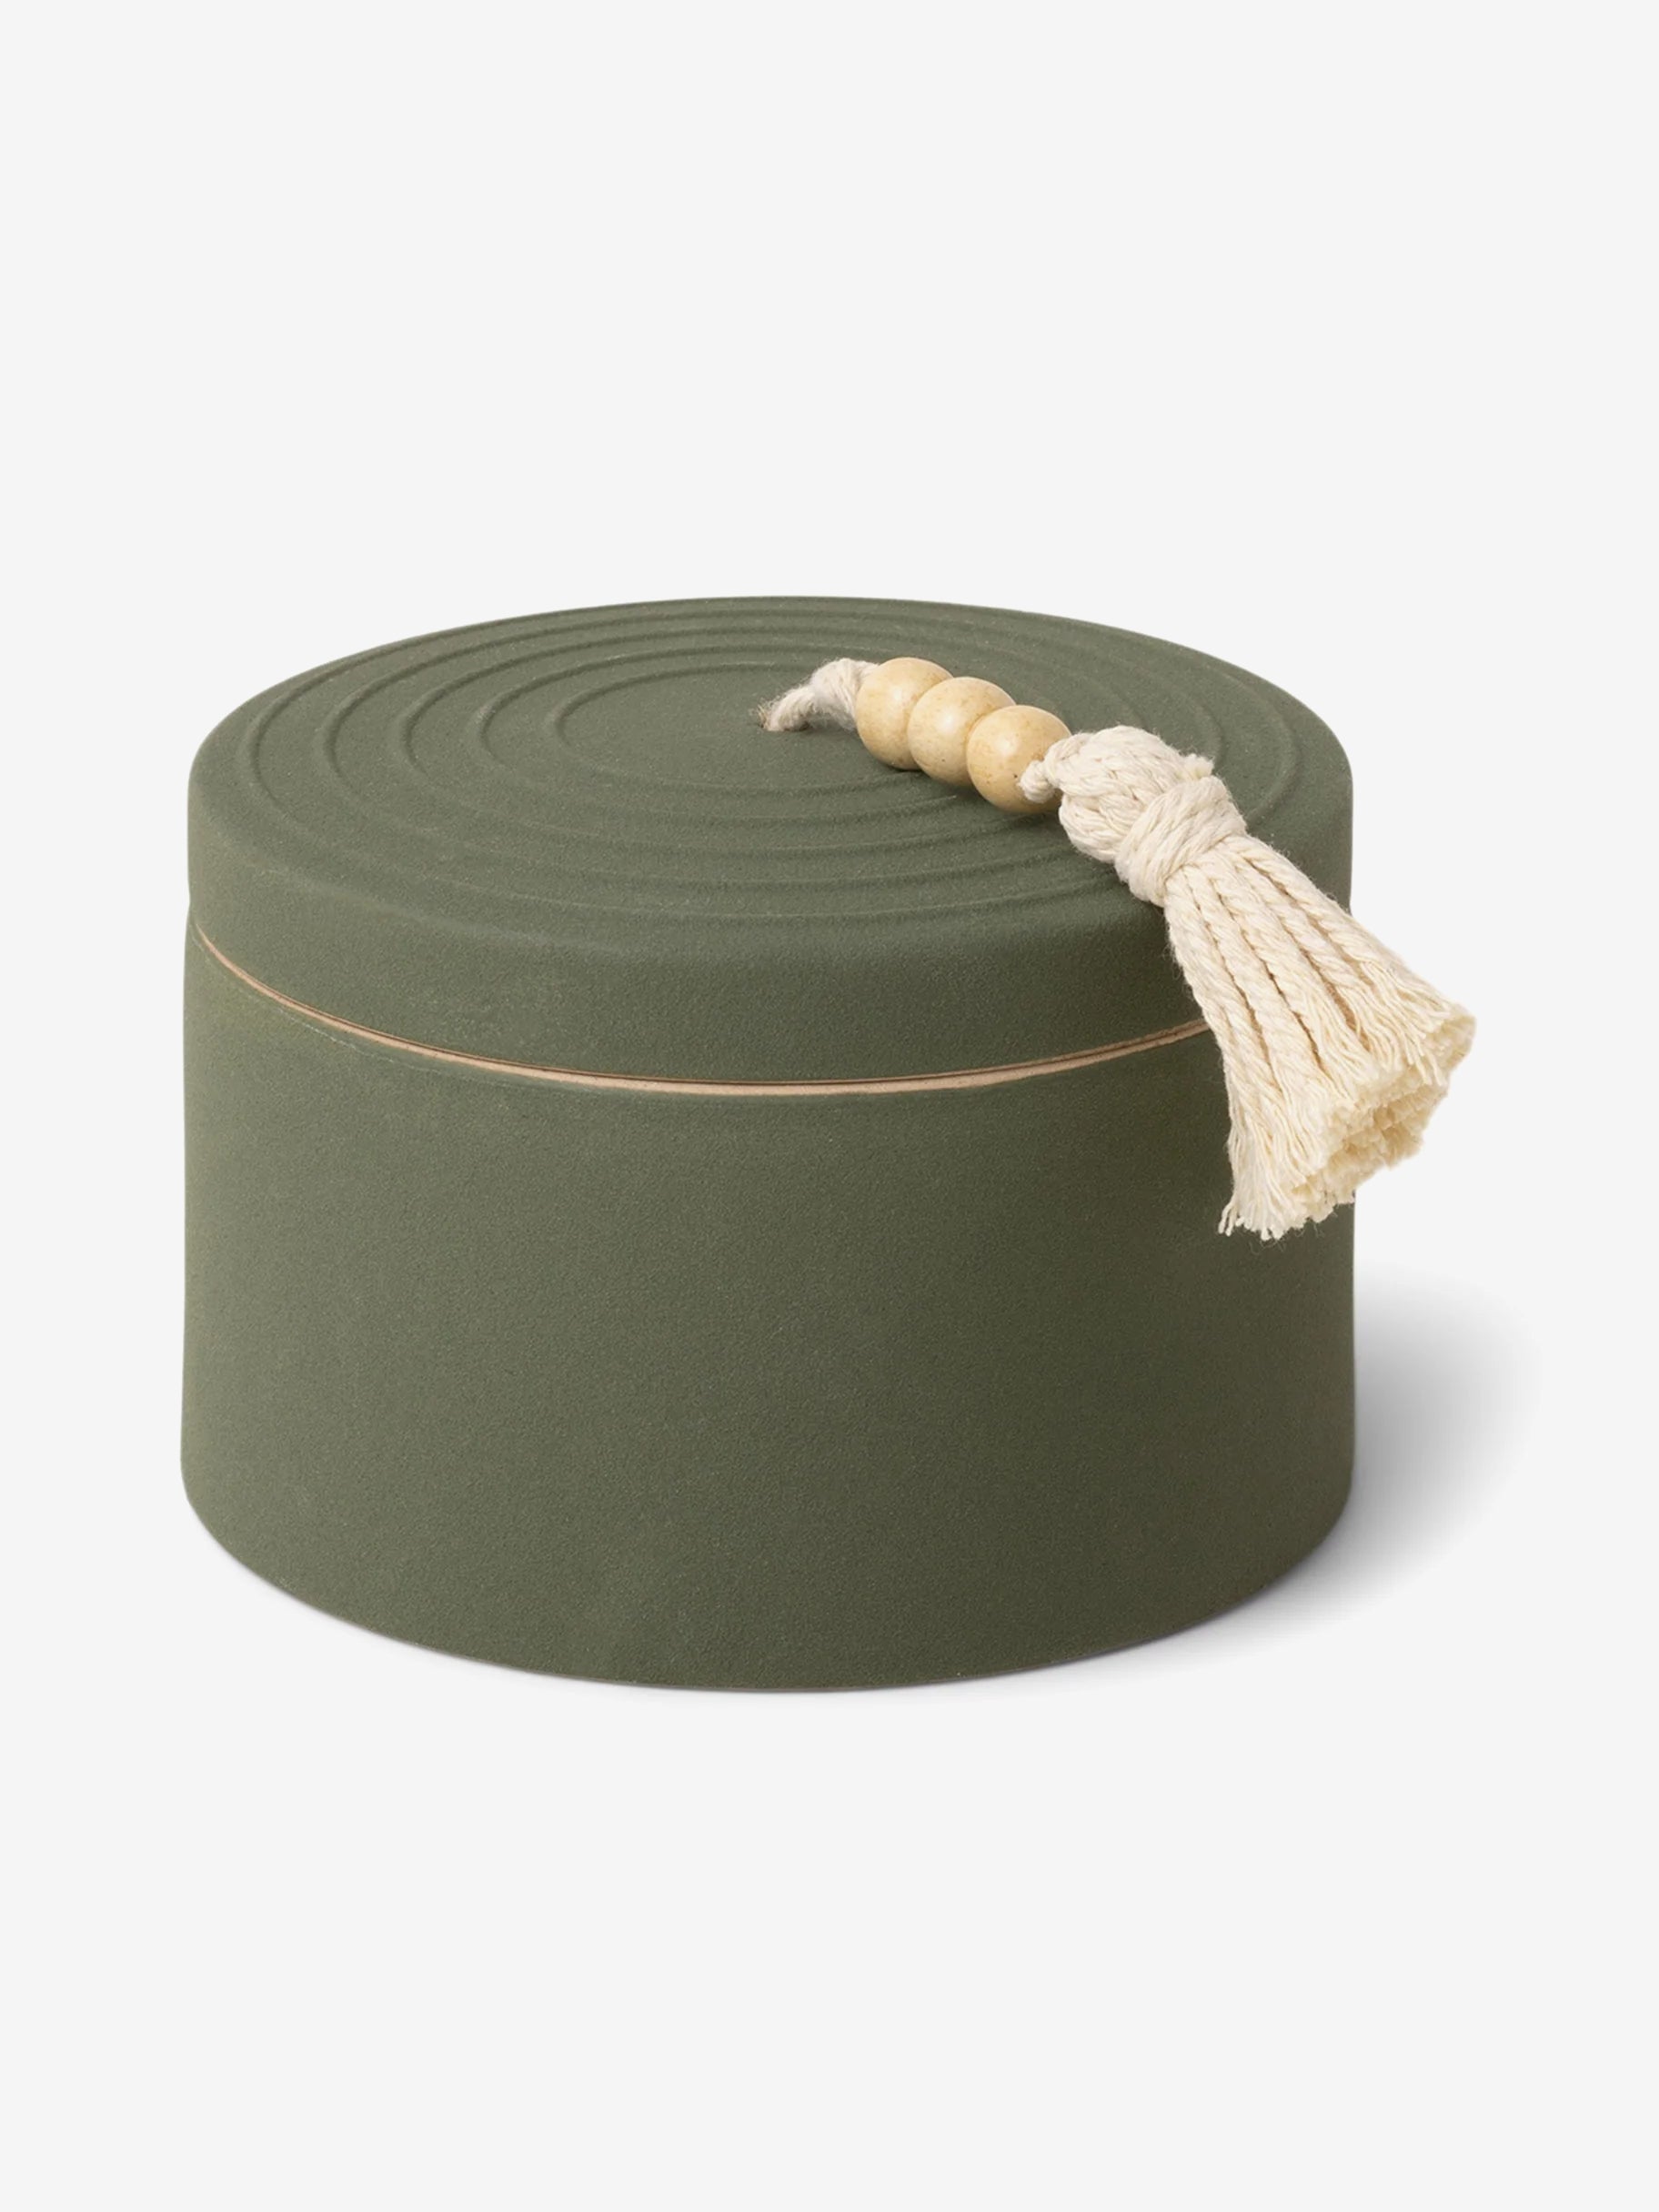 Paddywax Cypress & Fir Ceramic Candle with Lid - Dark Green